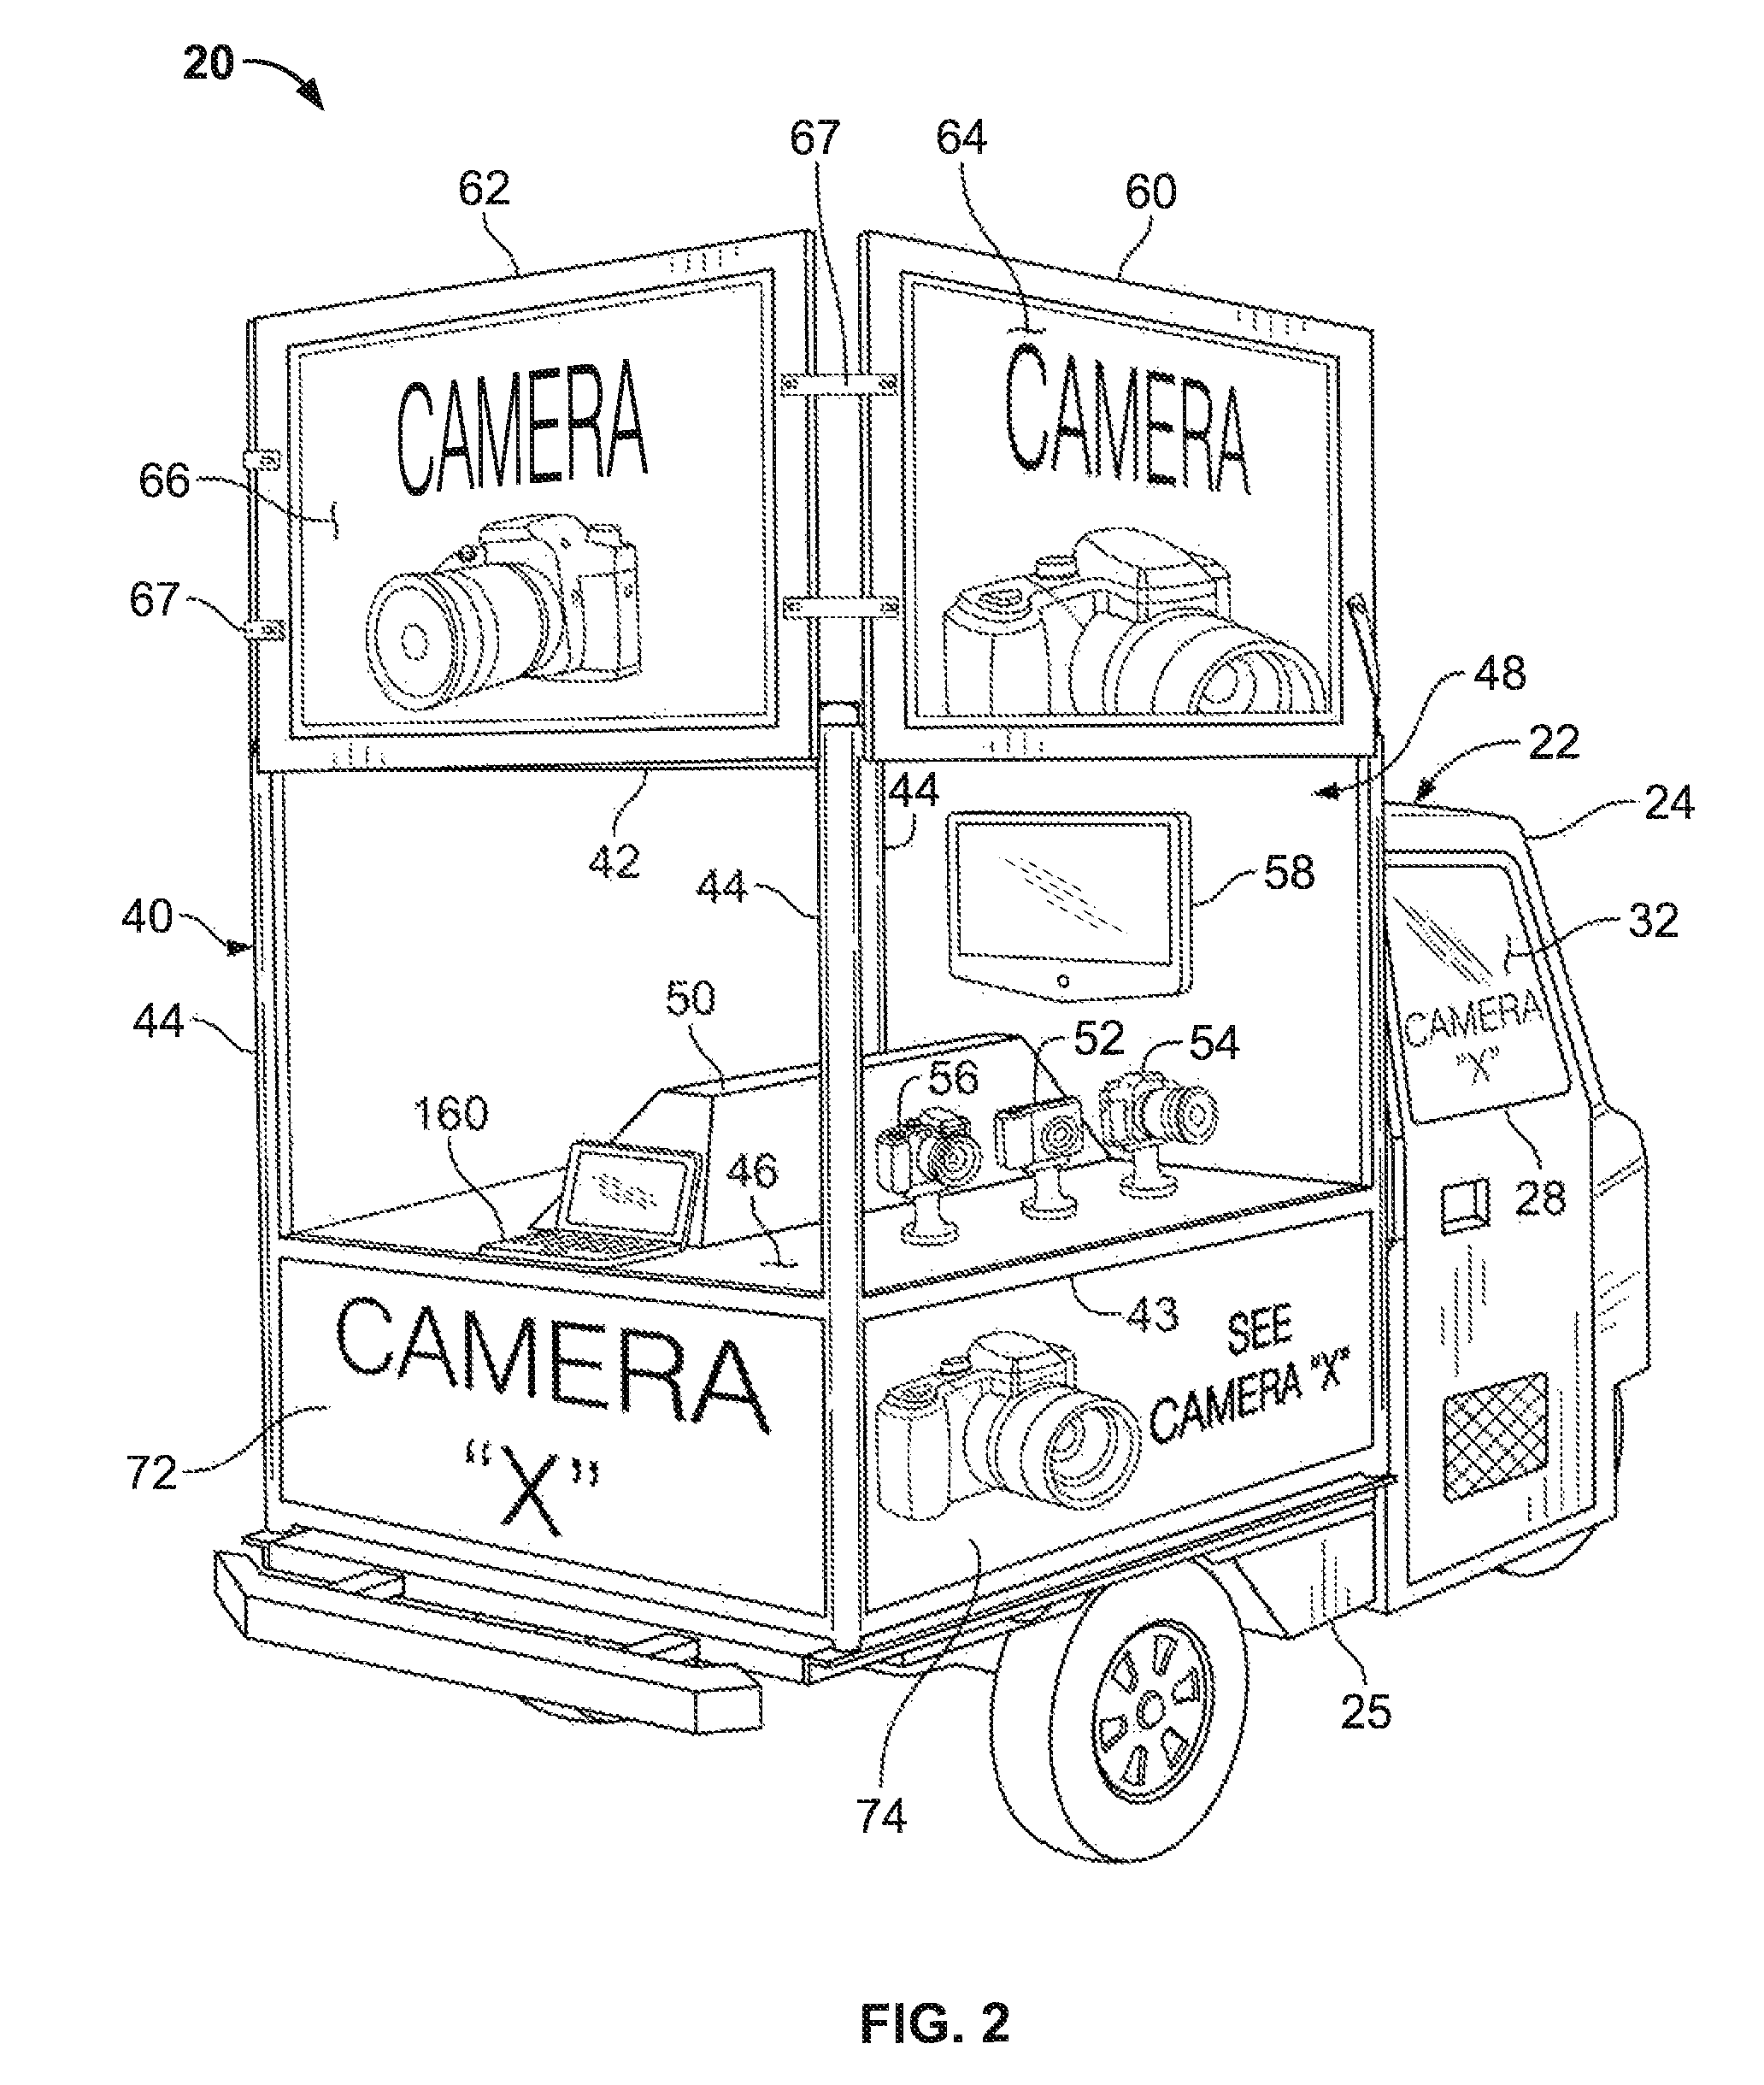 Method and apparatus for selling consumer products